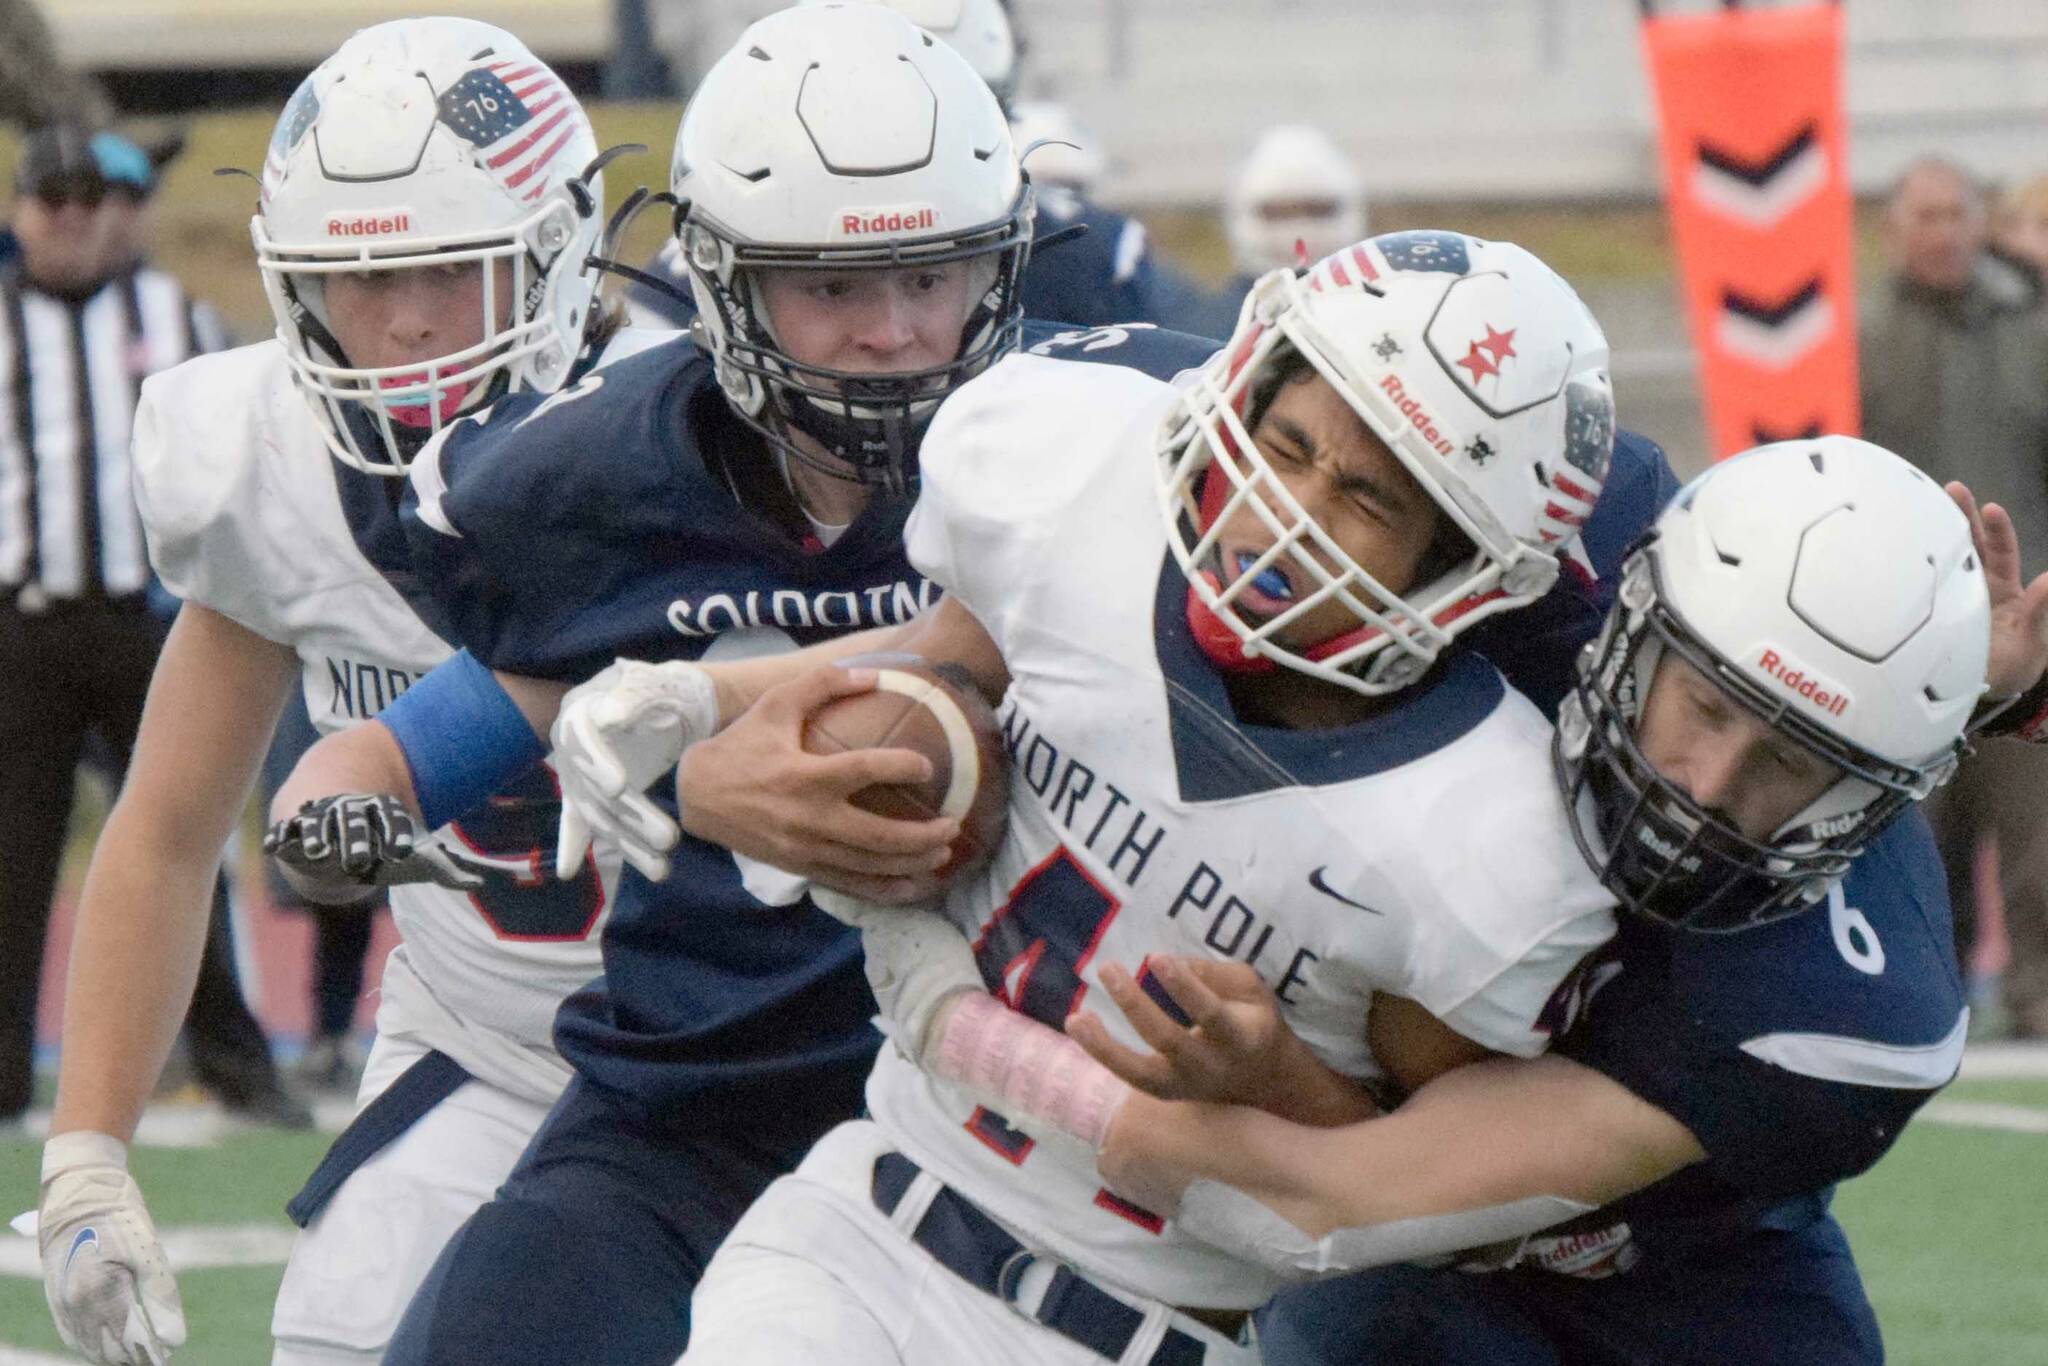 Soldotna's Jeren Nash and Wayne Mellon combine to bring down Via Skipps of North Pole on Friday, Oct. 8, 2021, at Justin Maile Field in Soldotna, Alaska. (Photo by Jeff Helminiak/Peninsula Clarion)